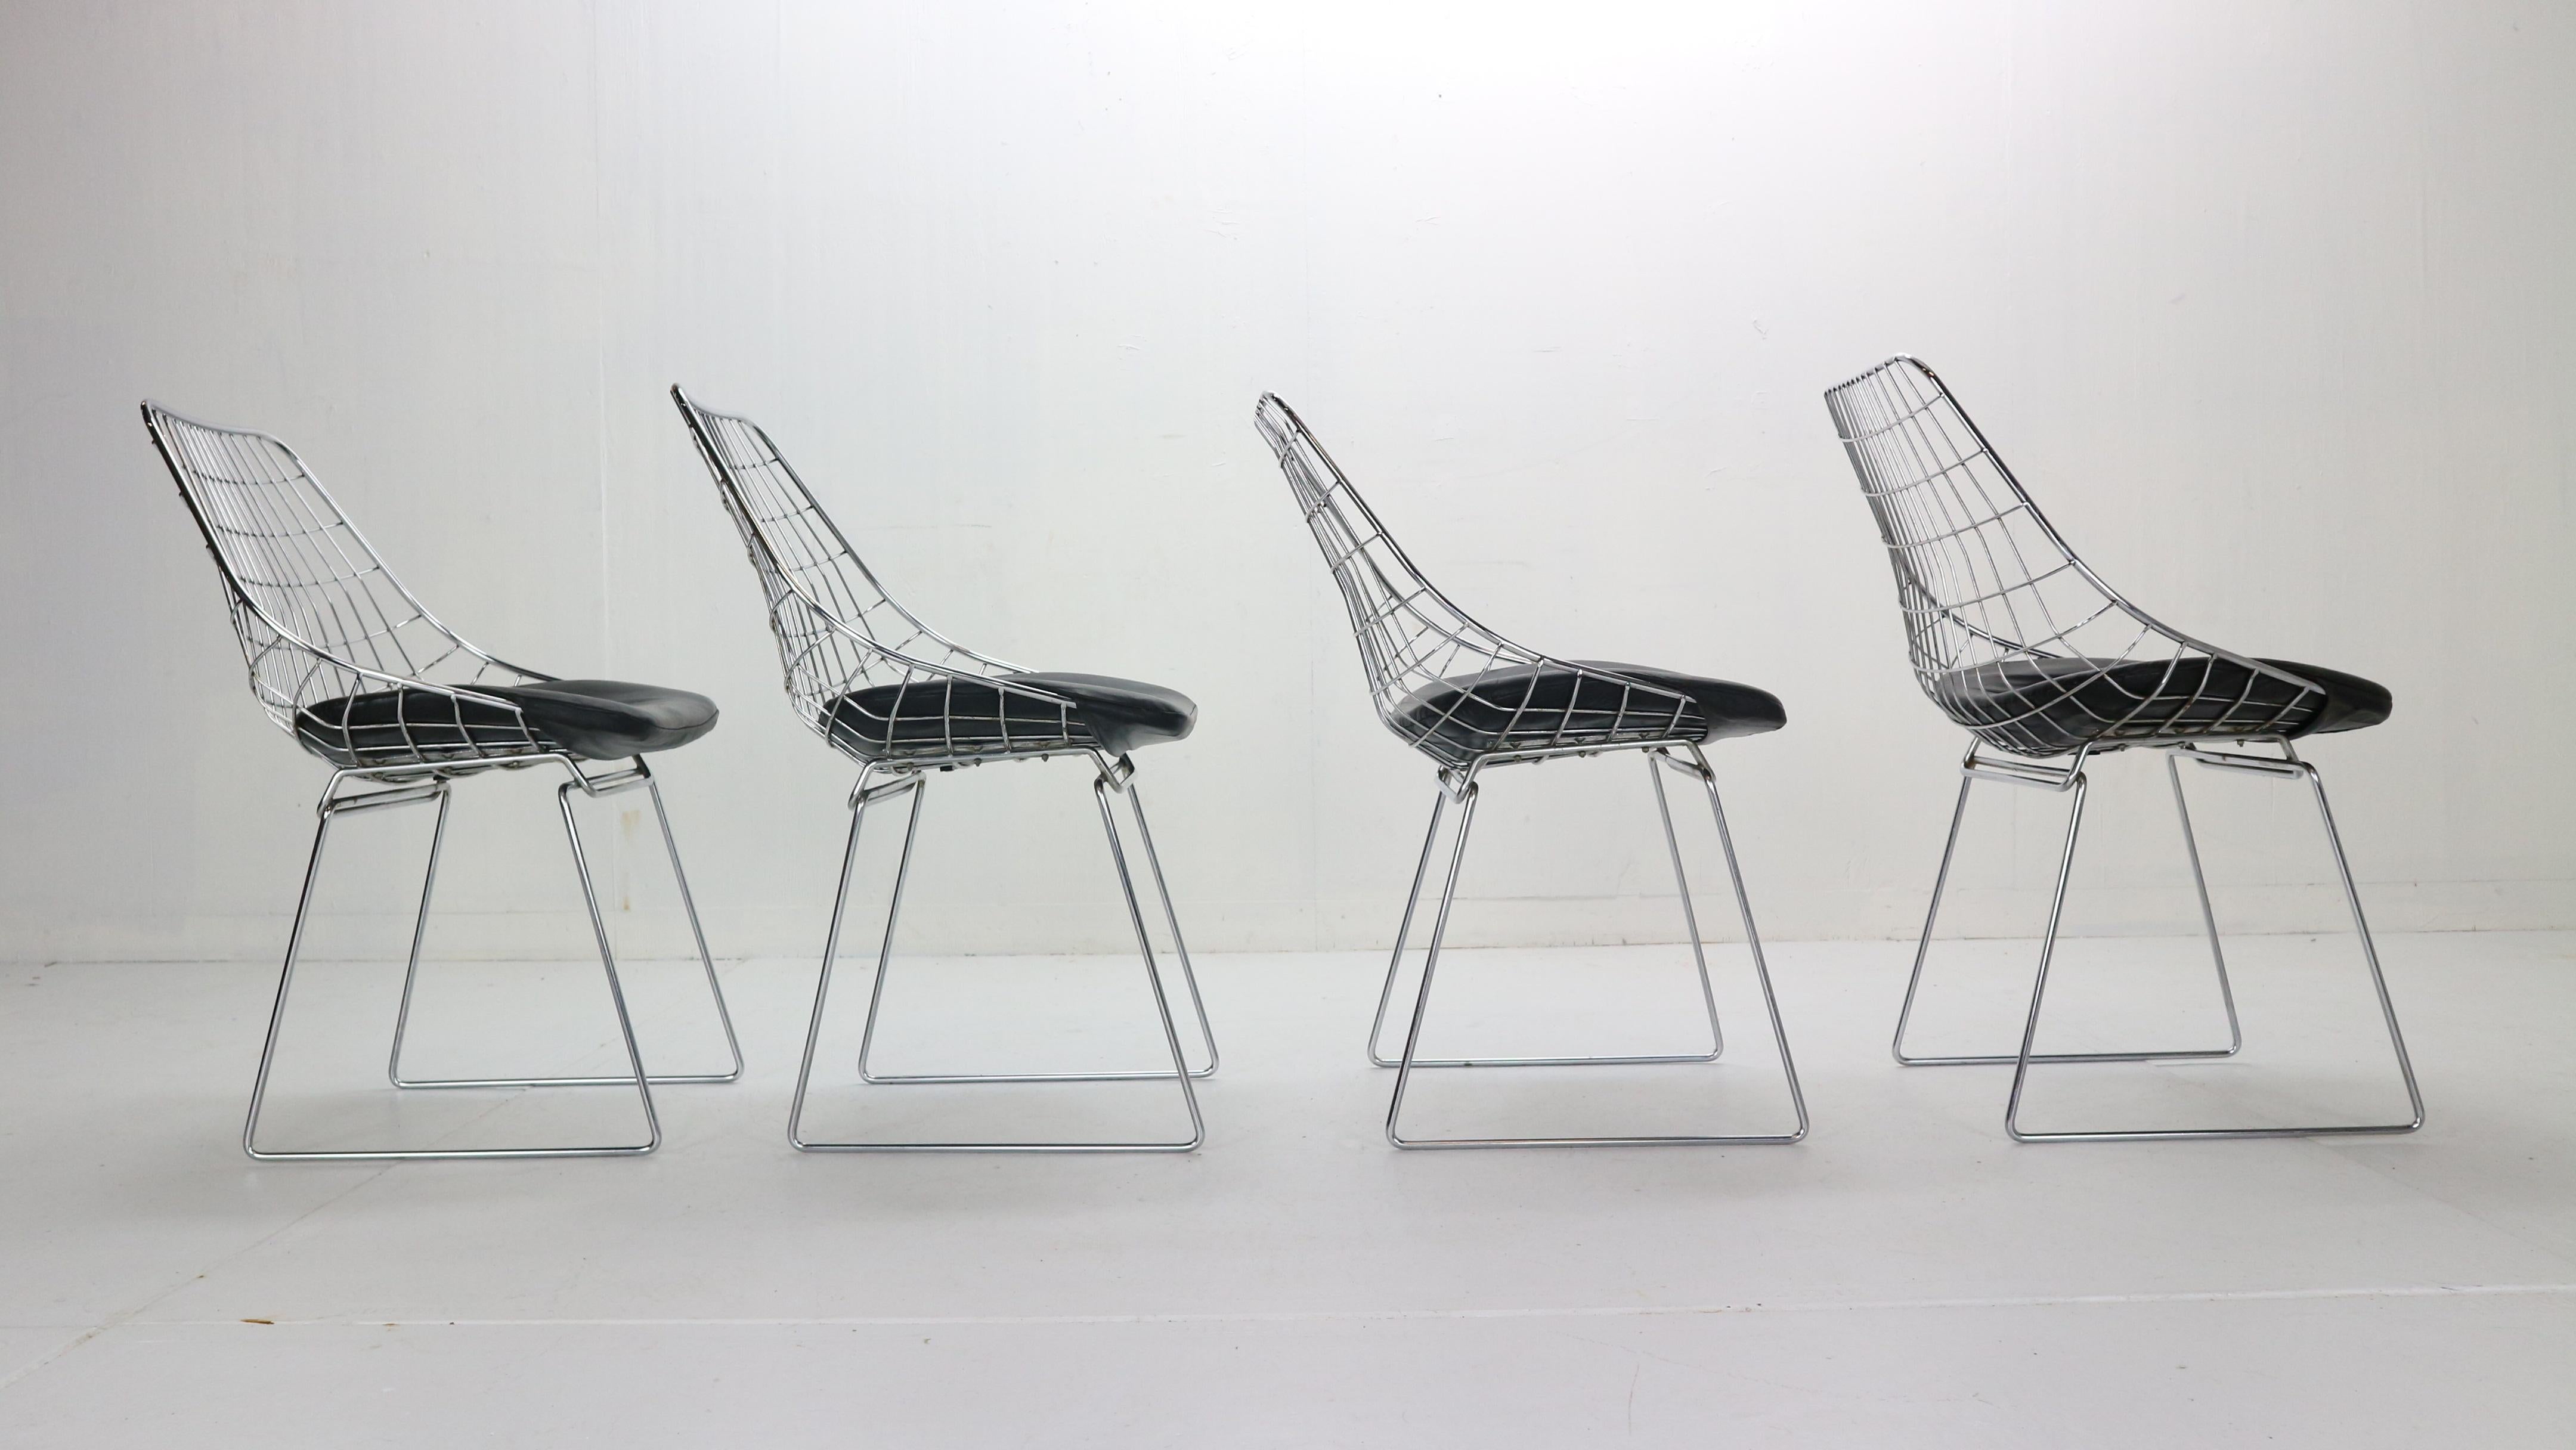 Leather Cees Braakman Set of 4 Wire Chairs Model, 'SM05' for Pastoe, 1950s